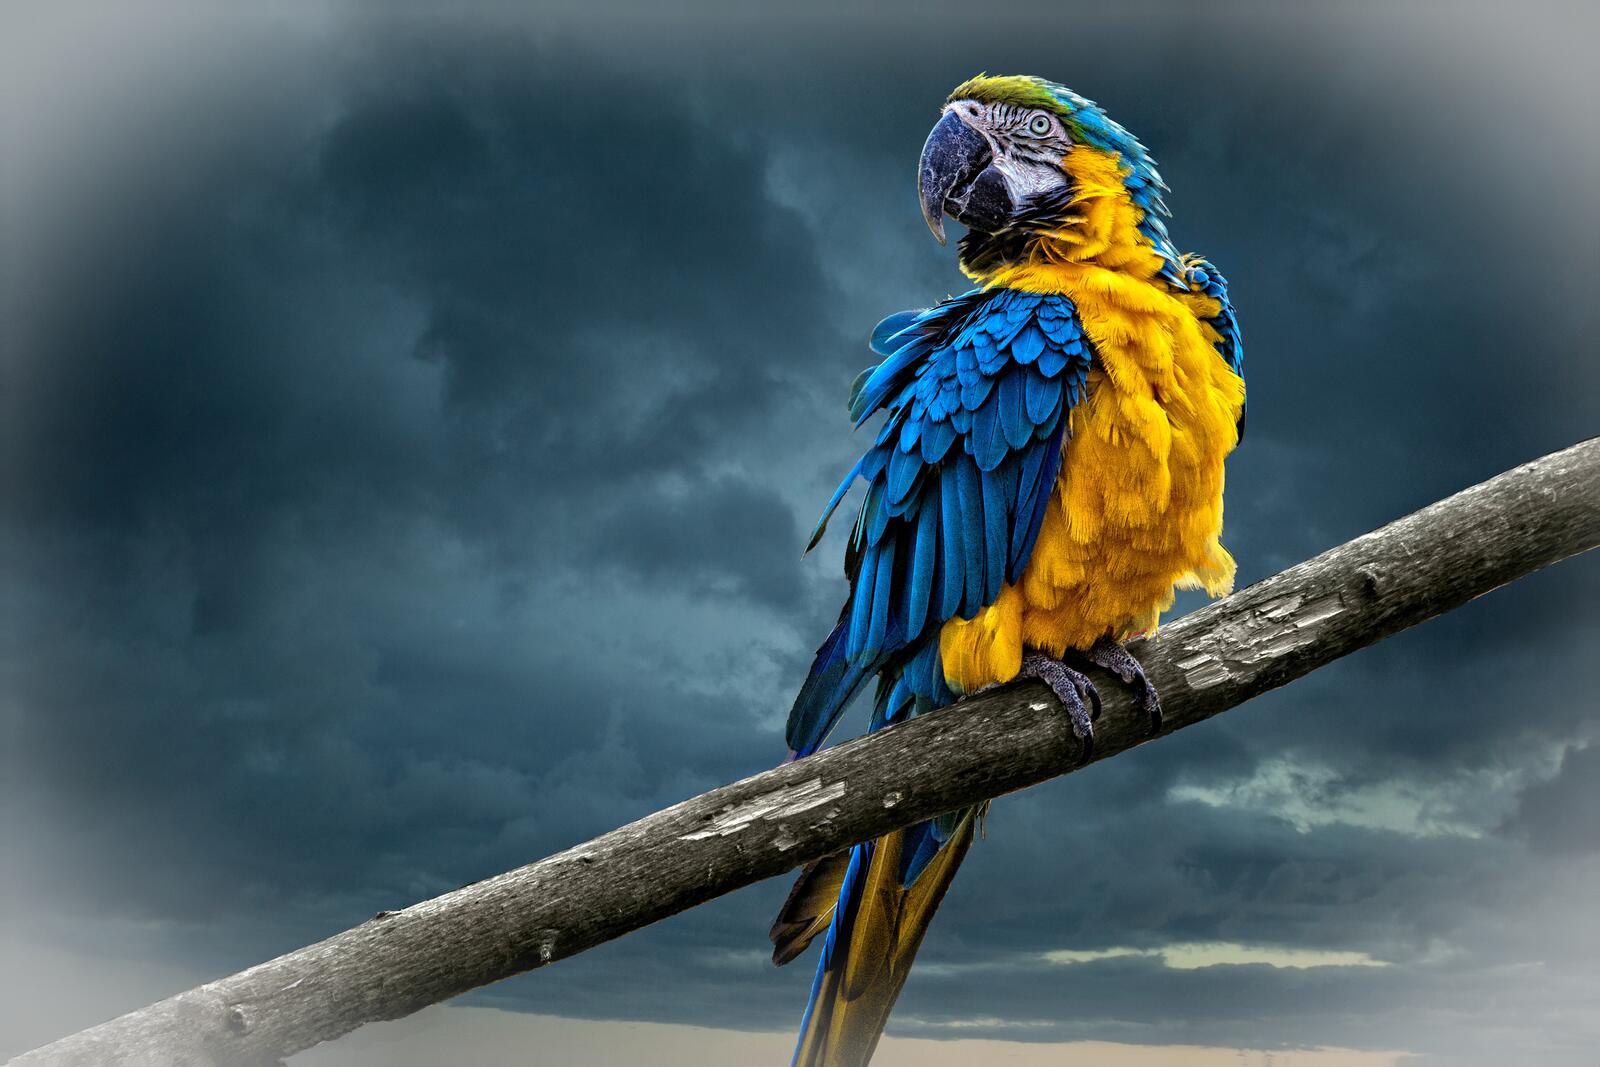 Wallpapers Macaw parrot bird the bird on the pole on the desktop